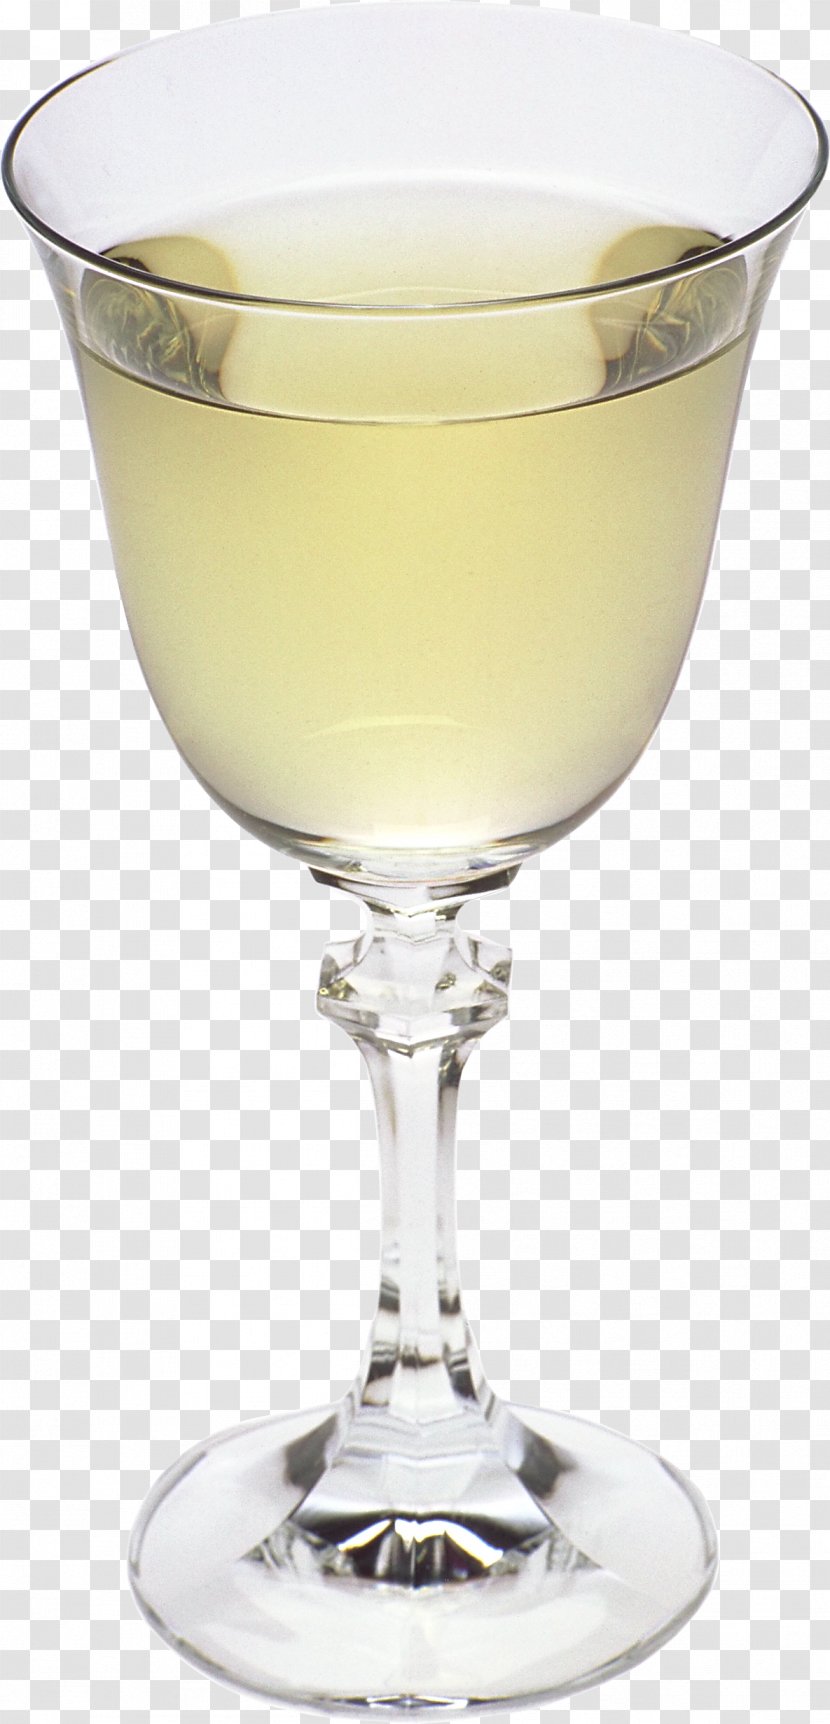 Red Wine Champagne Cocktail Cup - Glass - Image Transparent PNG